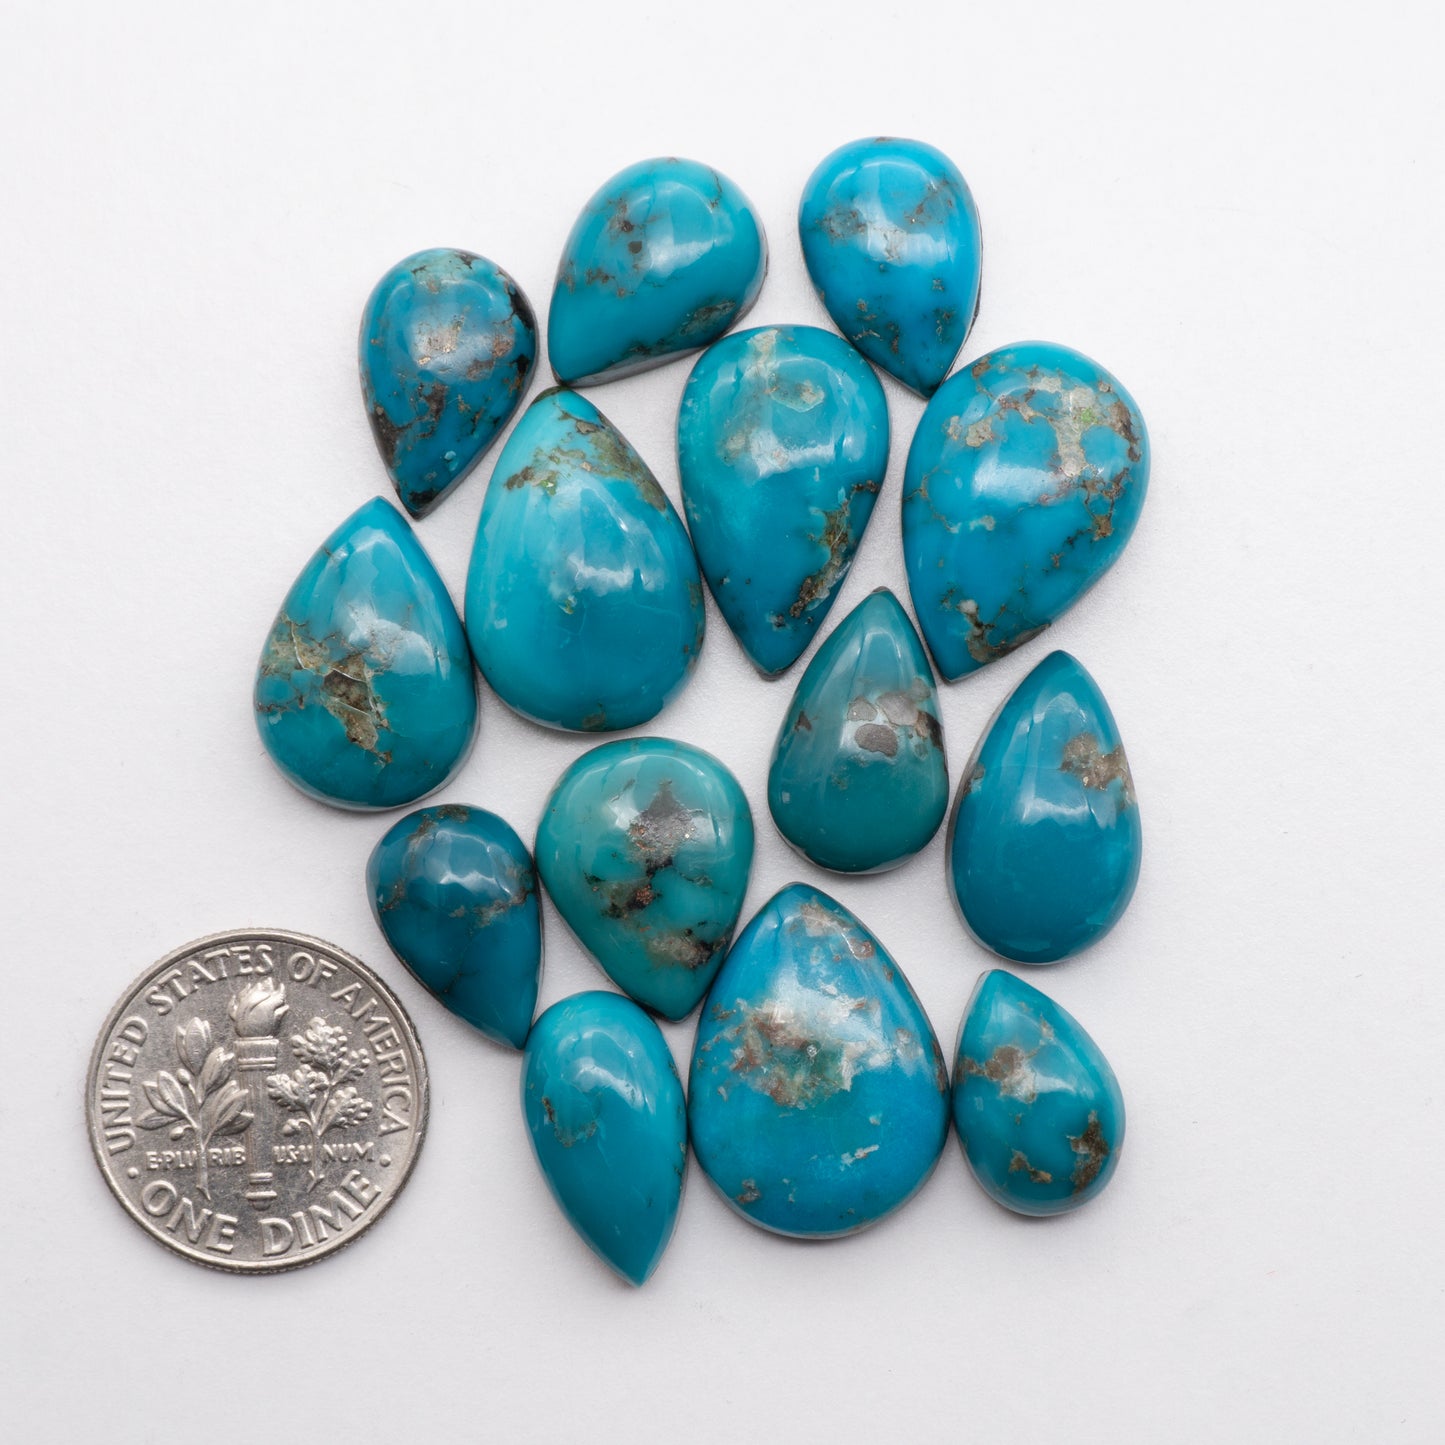 Add unique splashes of color to your jewelry with our Kingman Turquoise. Featuring natural blue hues, these cabochons offer a beautiful contrast to any design. These cabochons are backed for added strength, perfect for necklaces, earrings, and more!